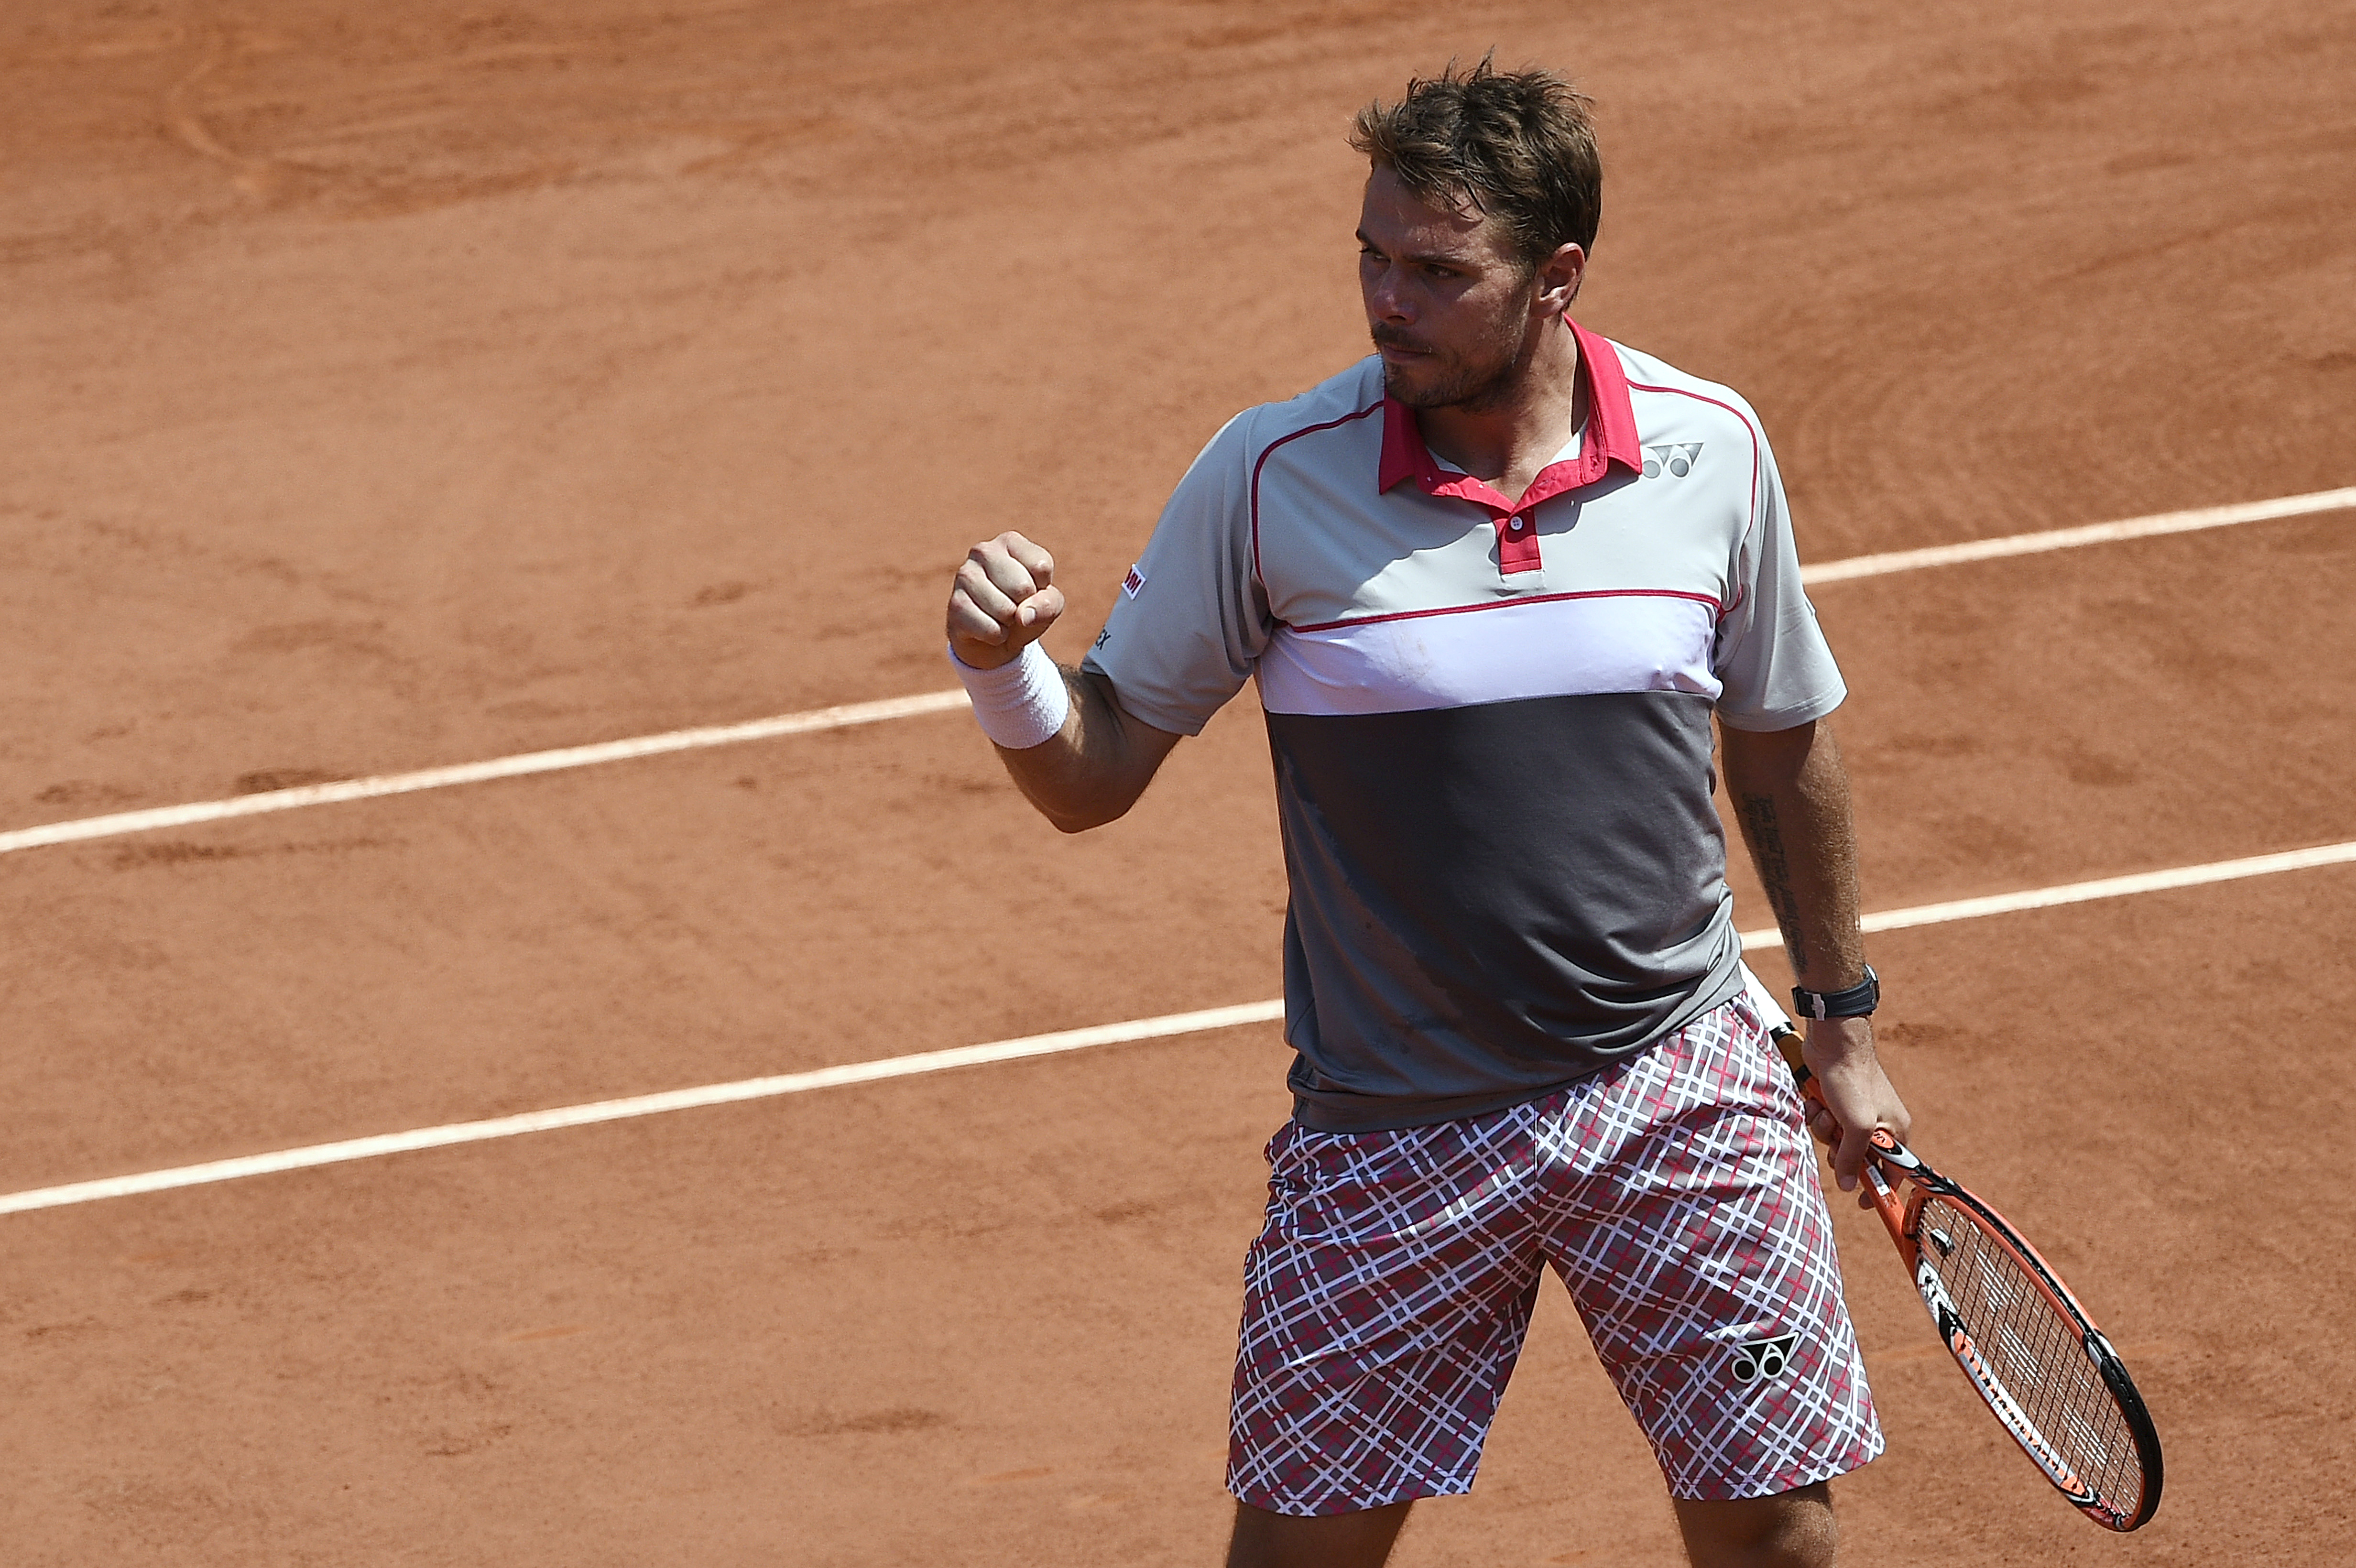 Switzerland's Stanislas Wawrinka reacts after a point against France's Jo-Wilfried Tsonga during their men's semi-final match of the Roland Garros 2015 French Tennis Open in Paris on June 5, 2015.  AFP PHOTO / MIGUEL MEDINA